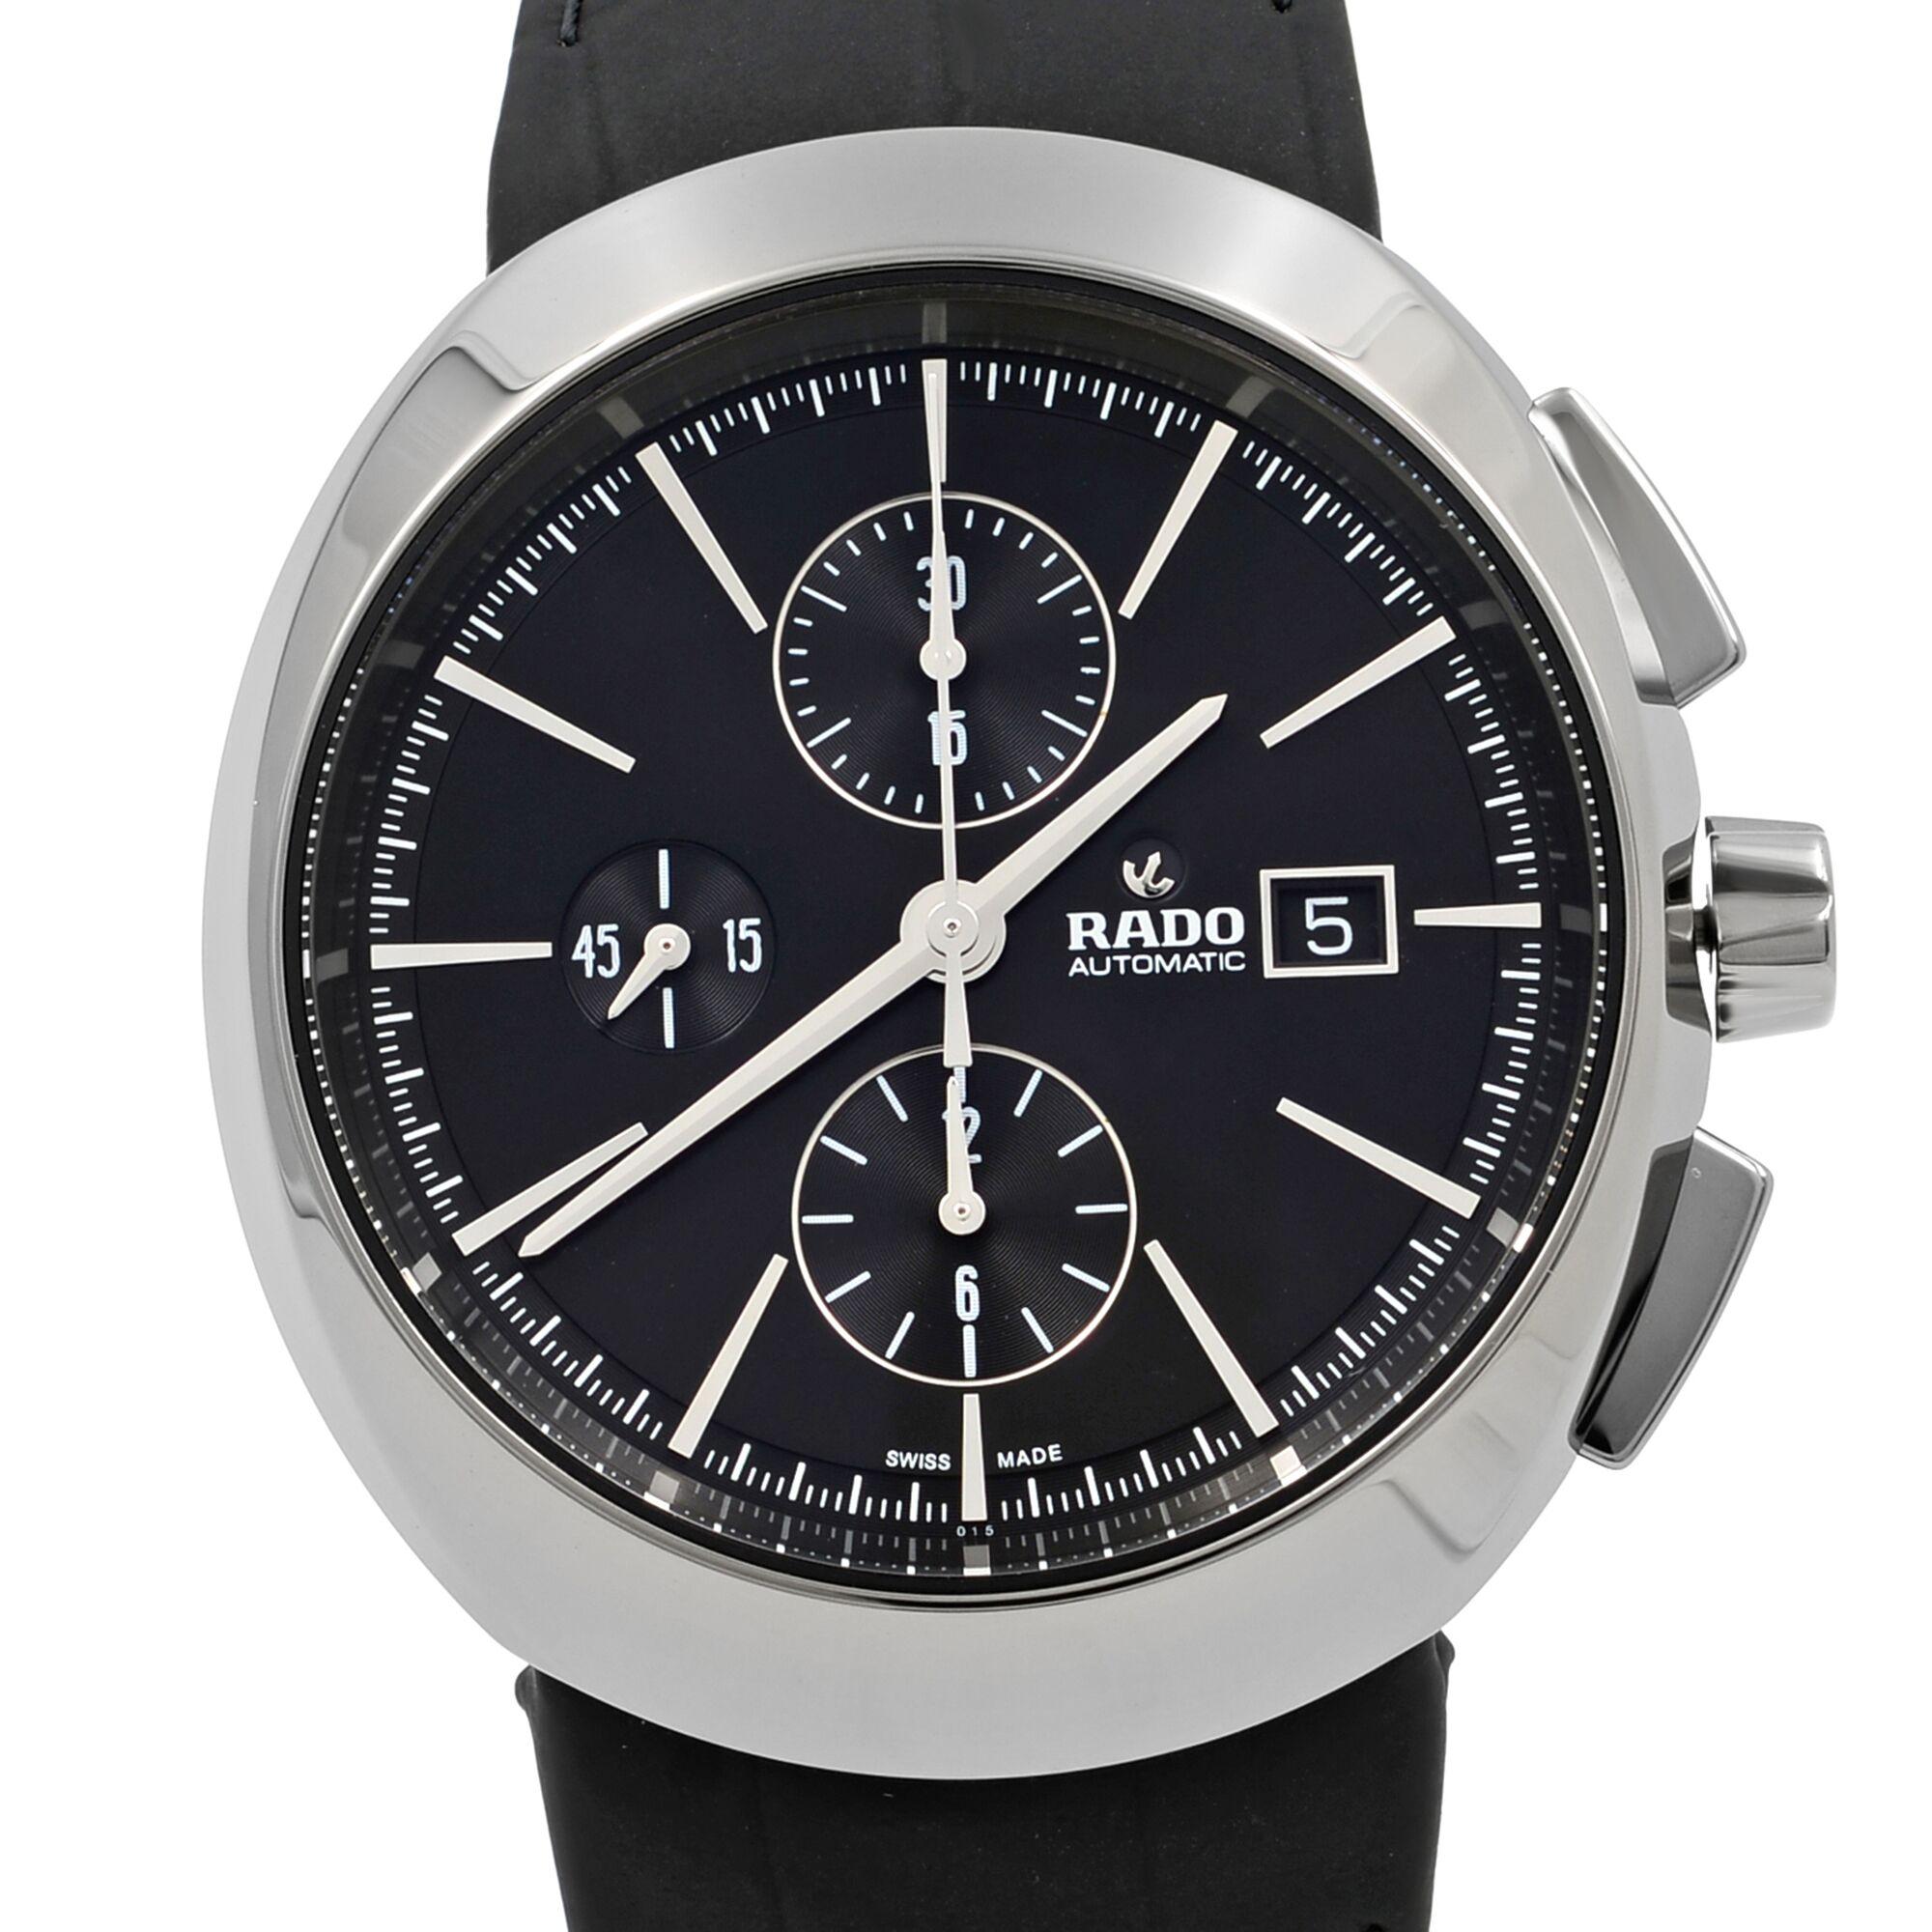 This brand new Rado D-Star R15556155 is a beautiful men's timepiece that is powered by an automatic movement which is cased in a ceramic case. It has a round shape face, chronograph, chronograph hand, date, small seconds subdial dial and has hand 